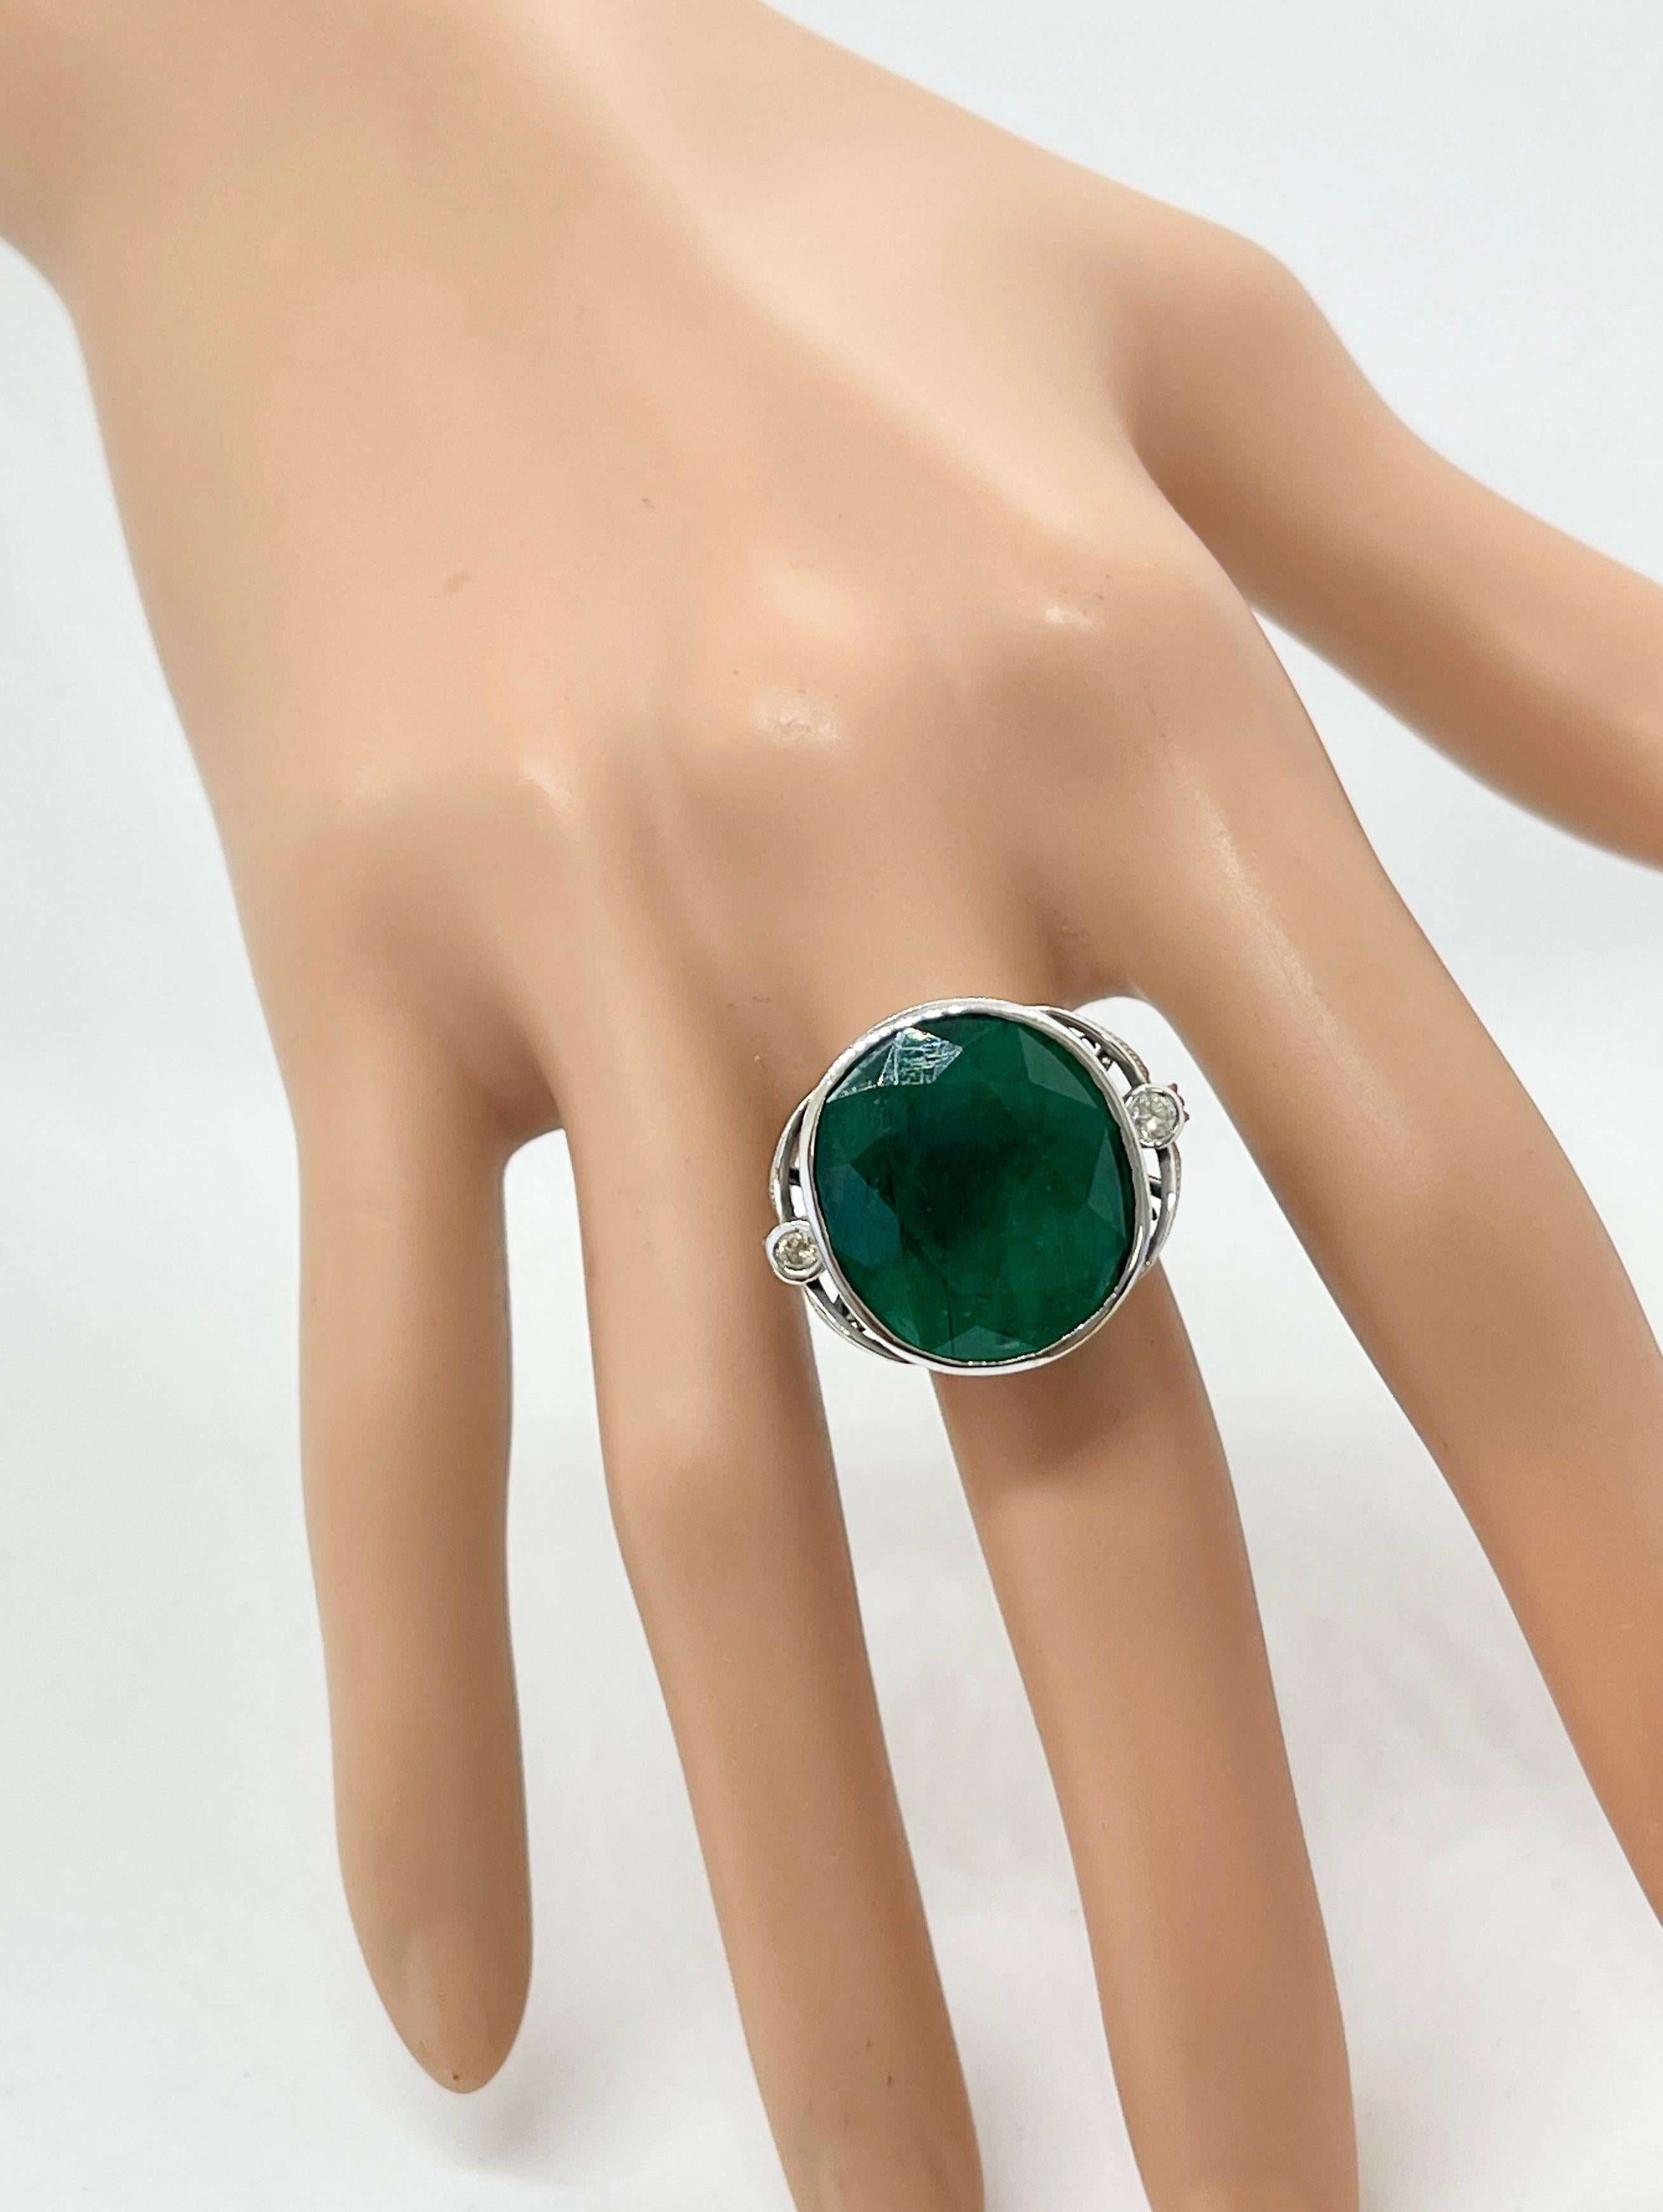 Amazing Huge 20CT Natural Emerald Diamond Ring 9ct White Gold with Valuation For Sale 2